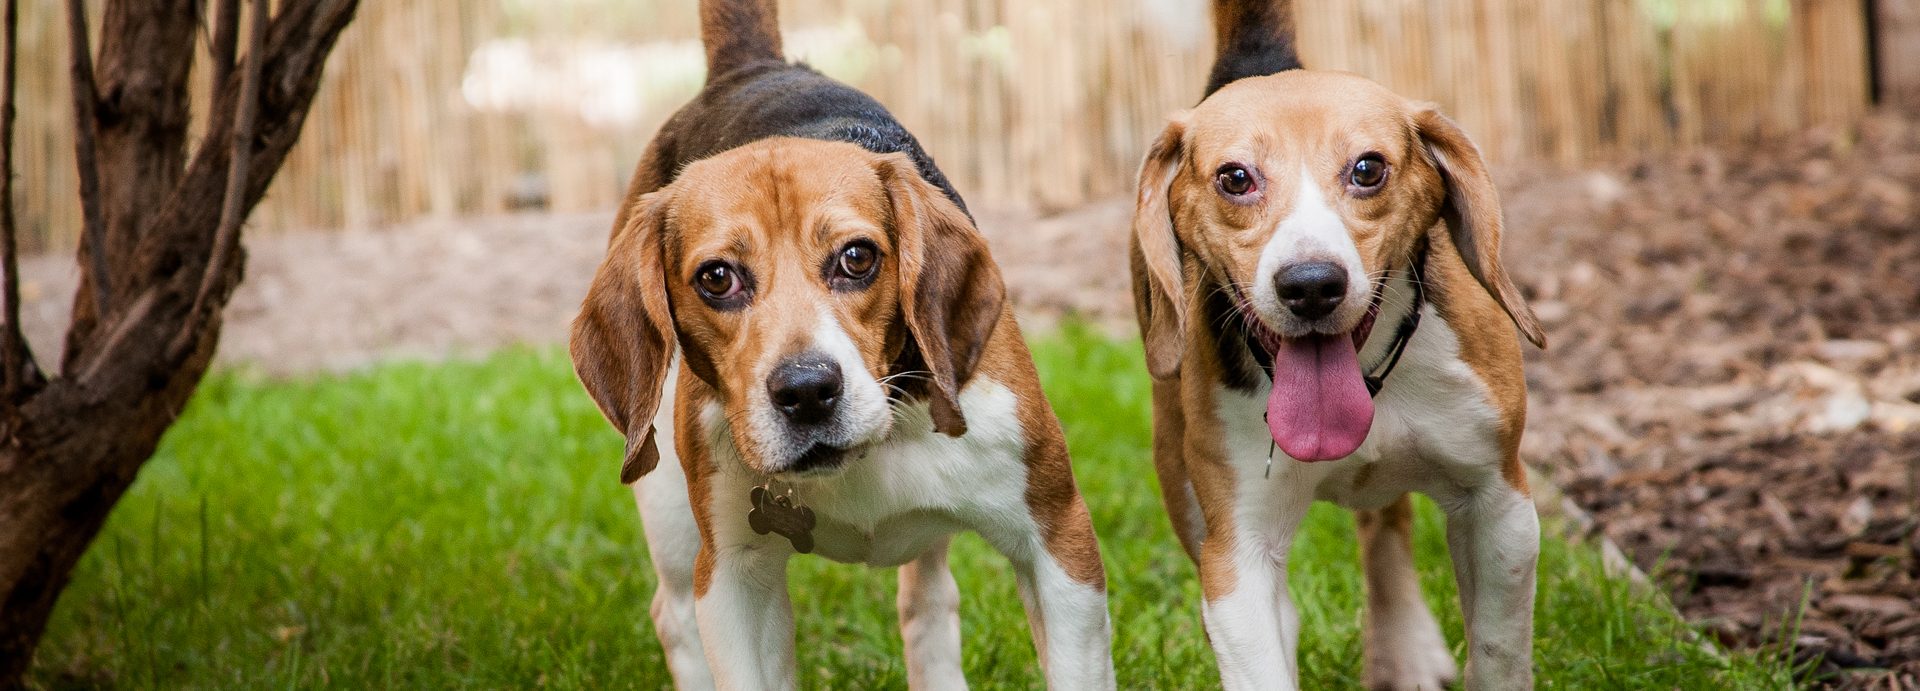 University of Missouri Researchers Blinded, Killed Six Beagles for Inconclusive Study